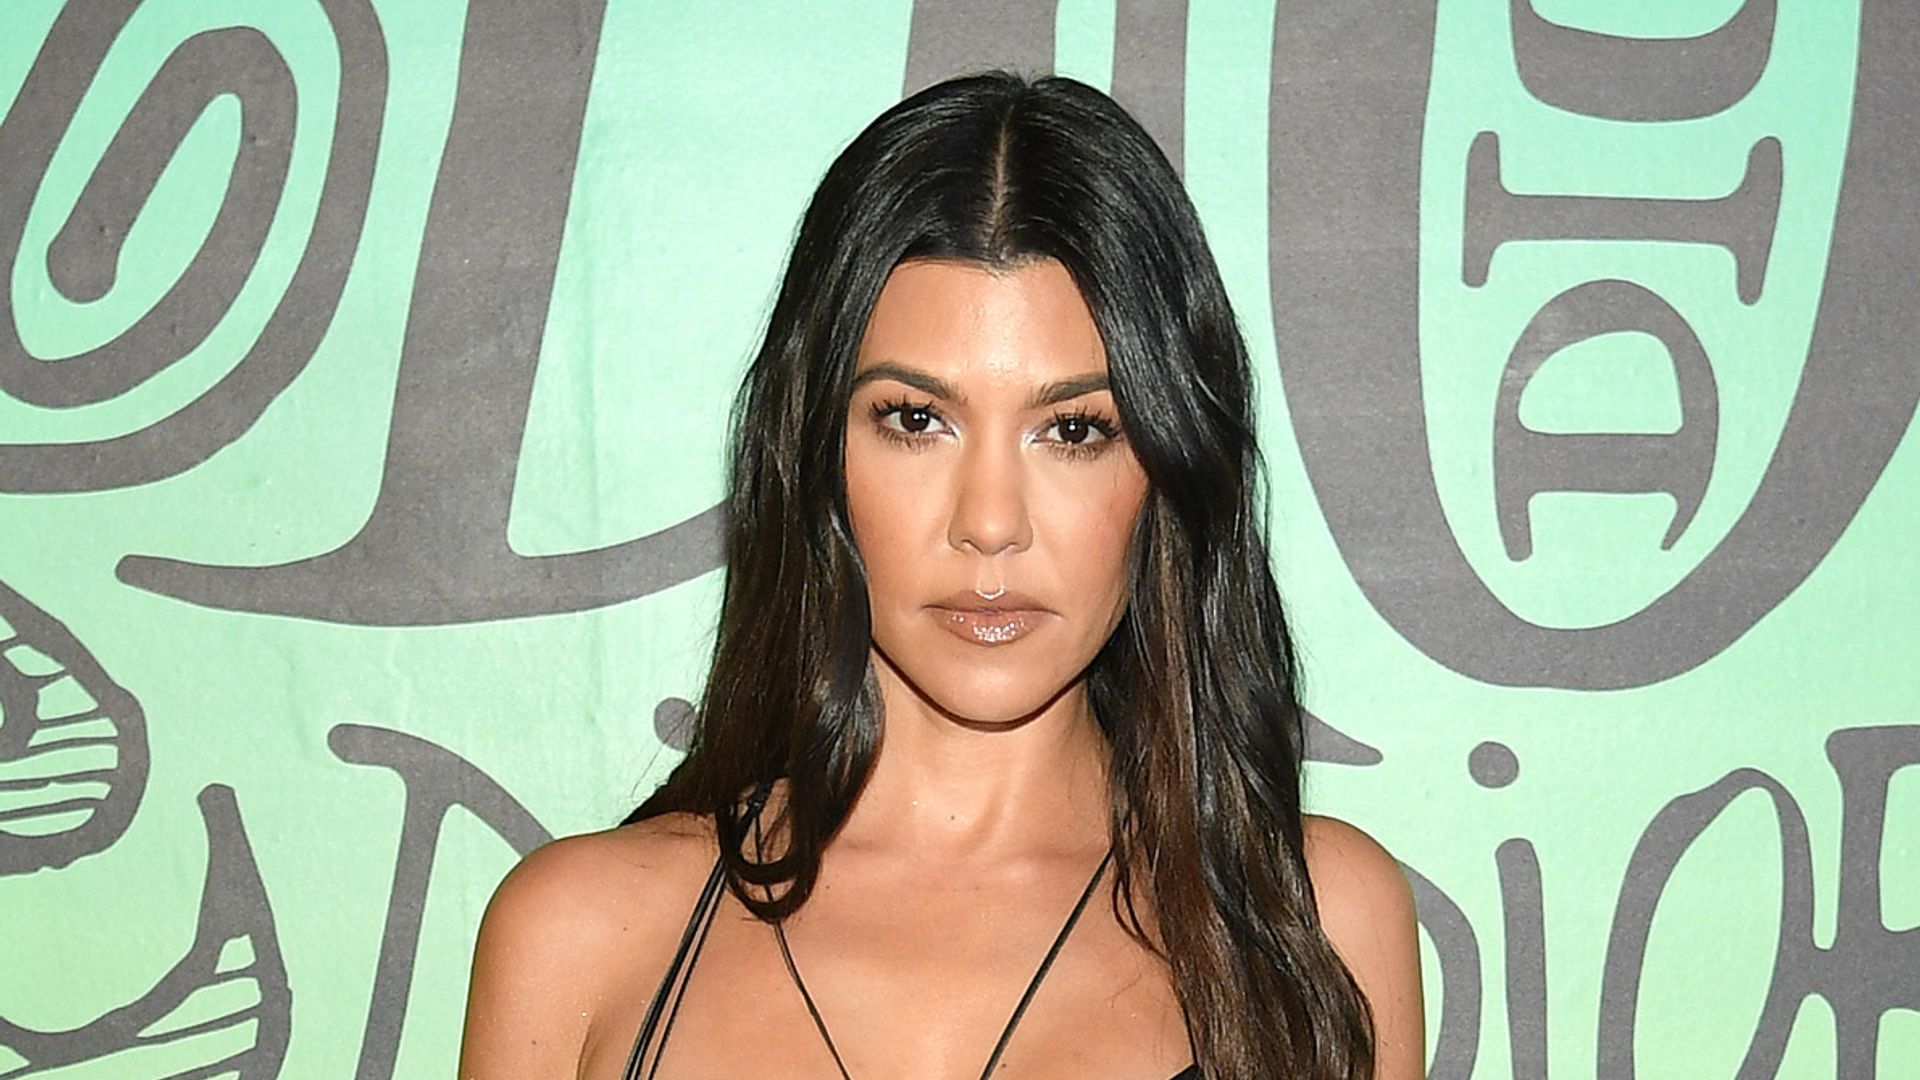 Kourtney Kardashian shares insight into postpartum experience as she admits to 'not feeling quite ready' for TV comeback